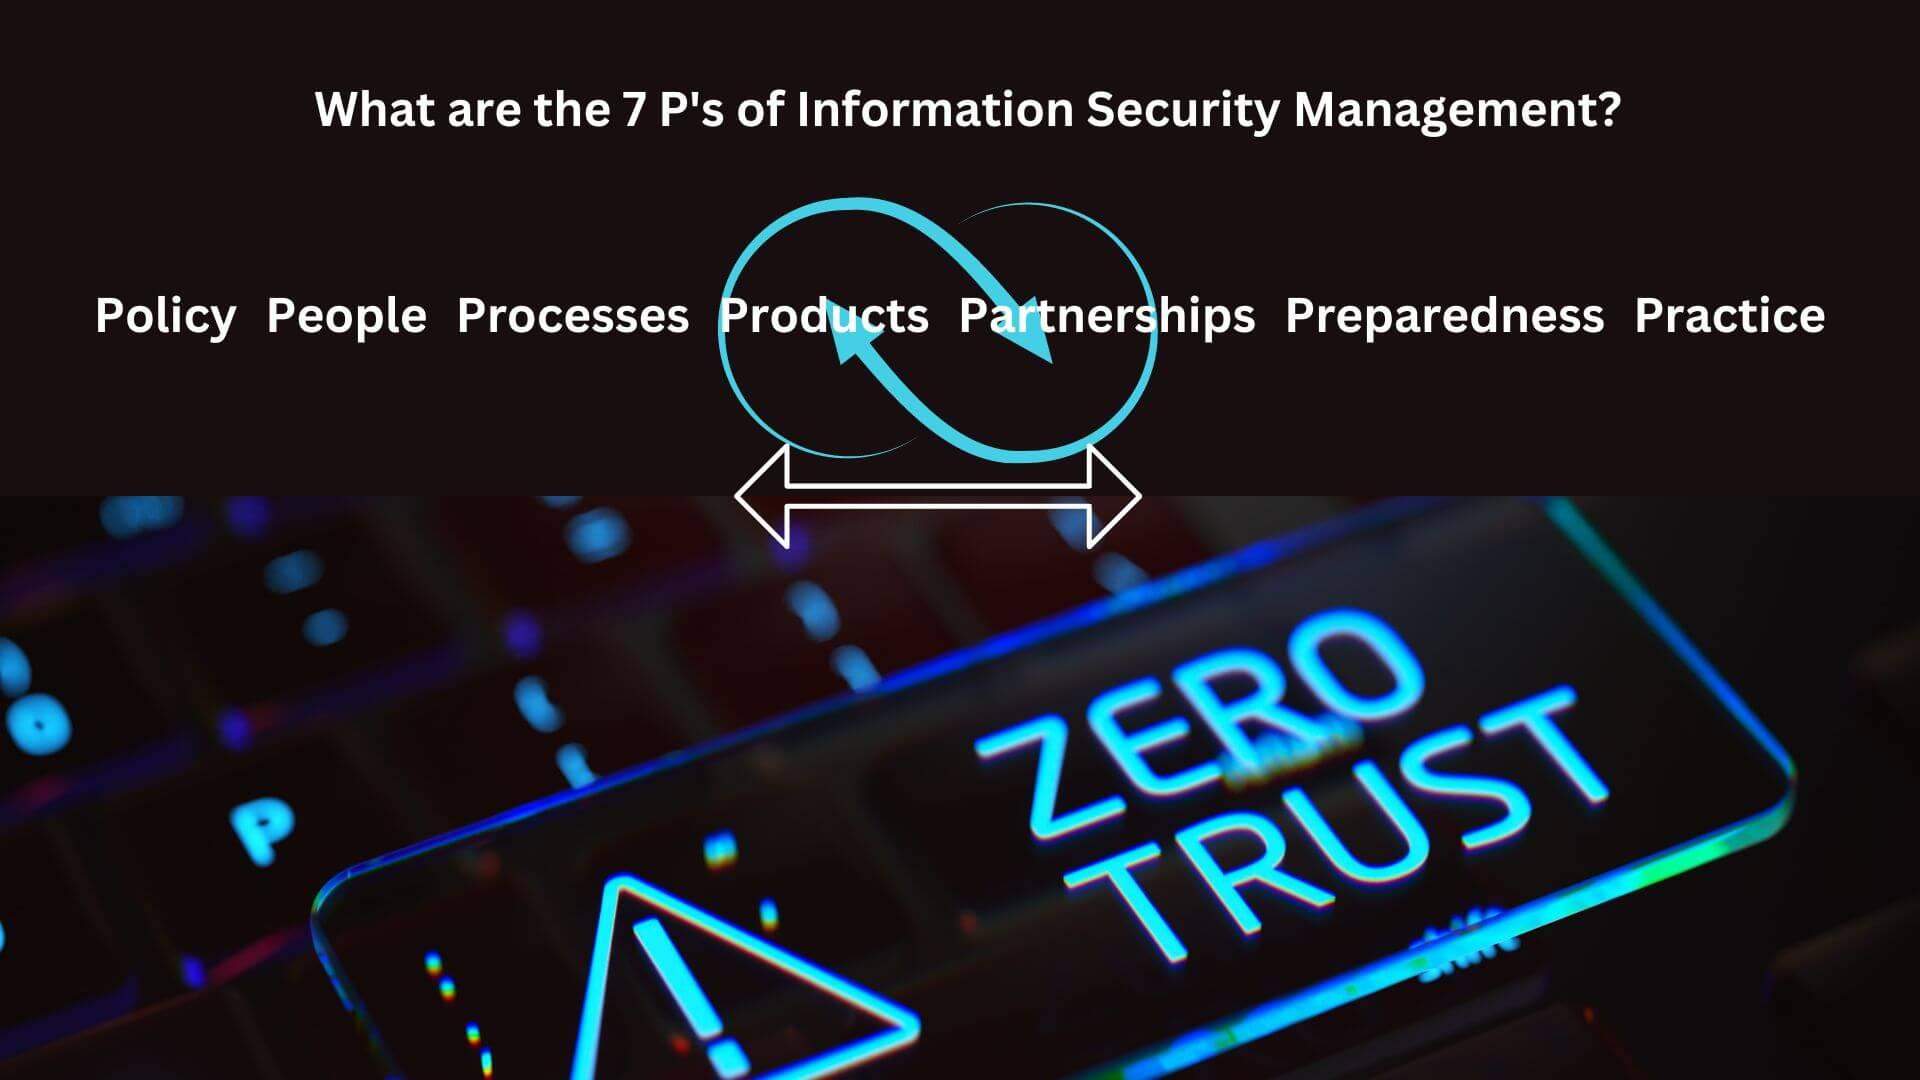 The 7 P's of Information Security Management